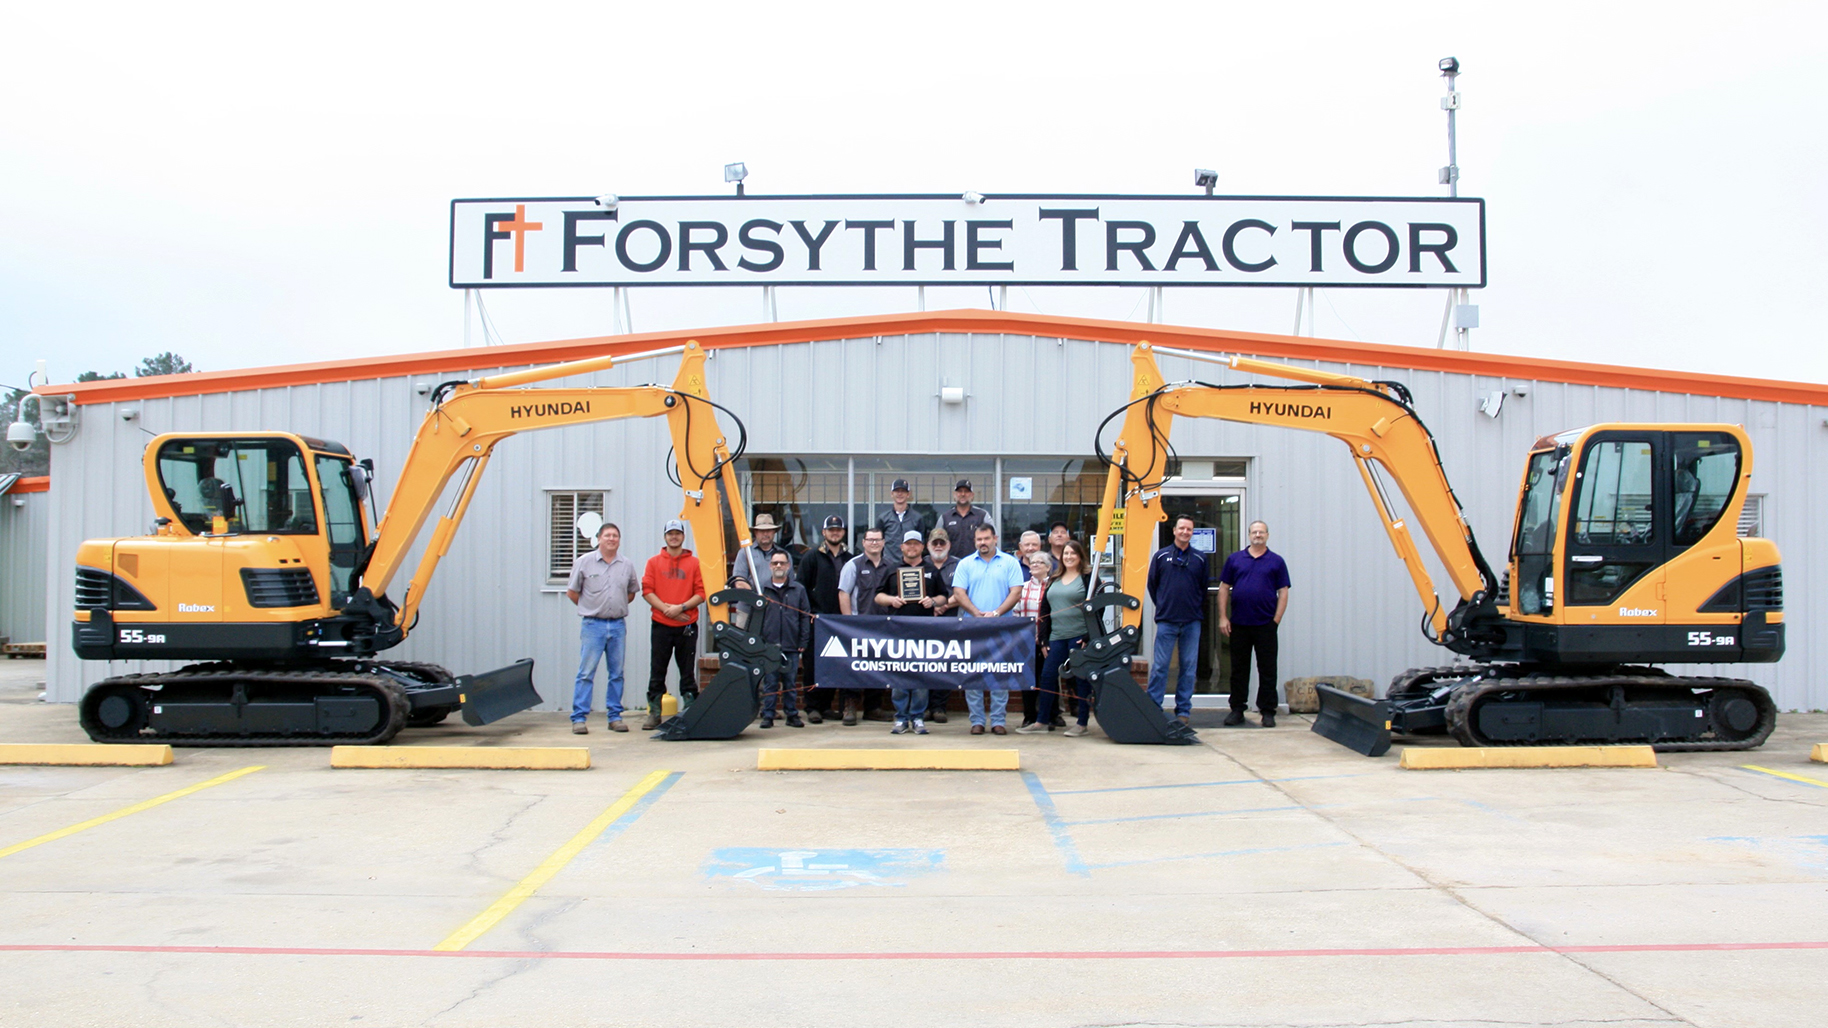 Hyundai Construction Equipment Adds Forsythe Tractor to Growing North American Distribution Network